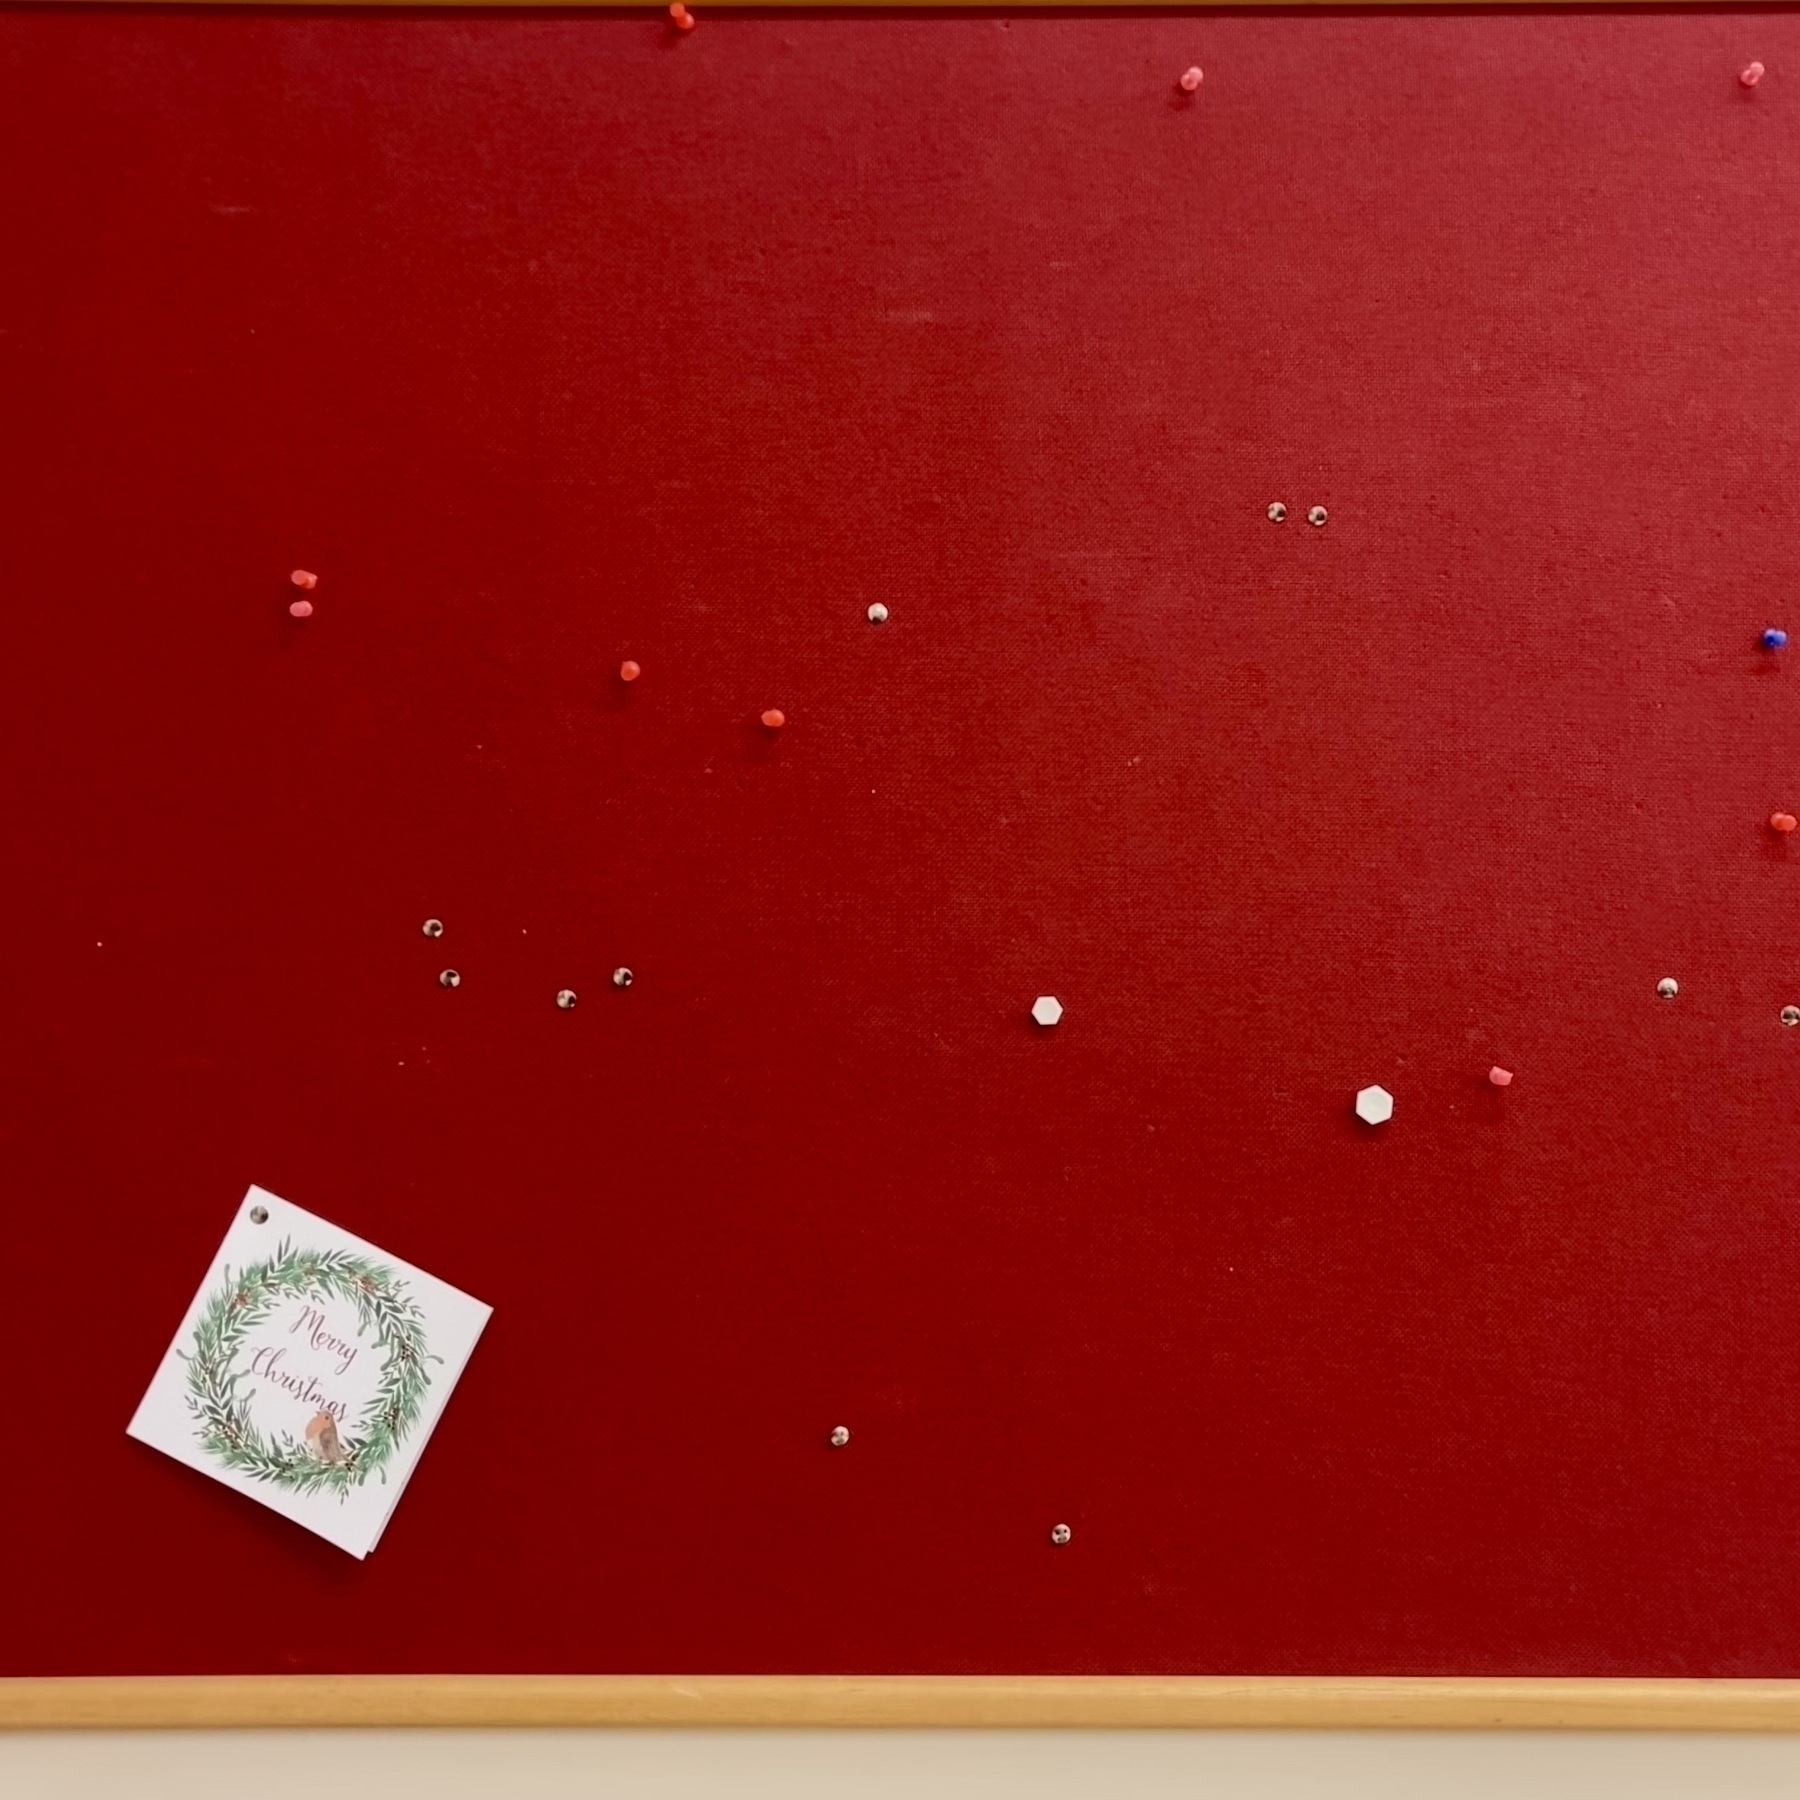 A solitary, forgotten Christmas card on a Christmas-red noticeboard stuck with pins